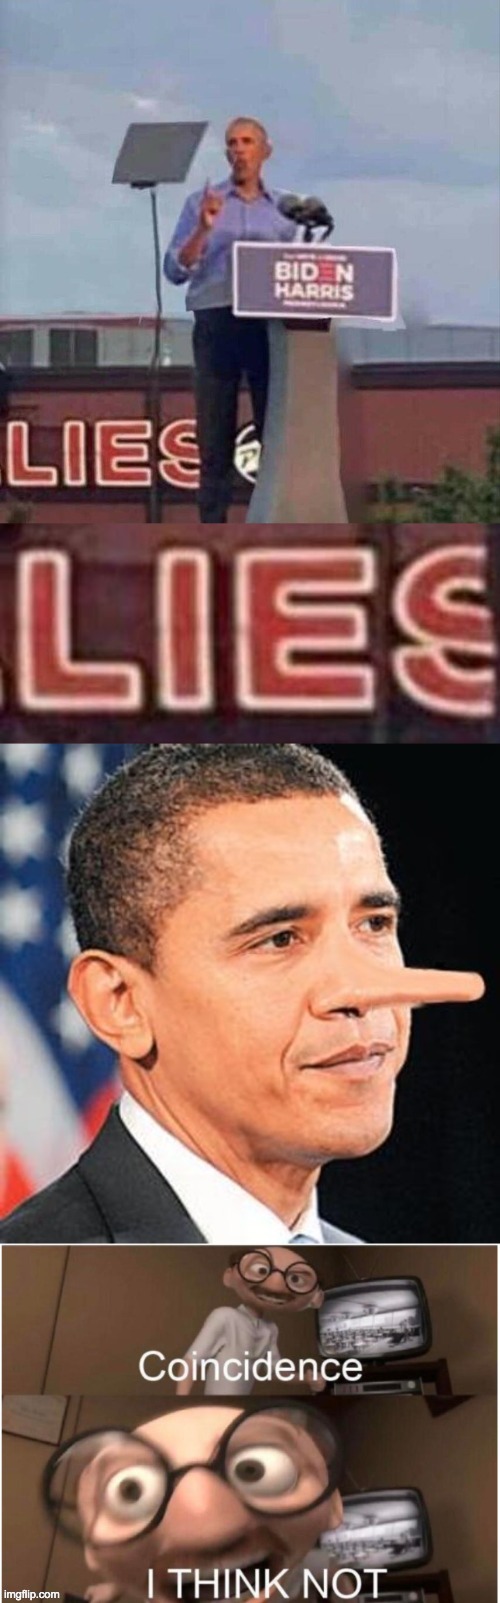 When reality confirms you are a liar | image tagged in coincidence i think not,memes,politics,obama,joe biden | made w/ Imgflip meme maker